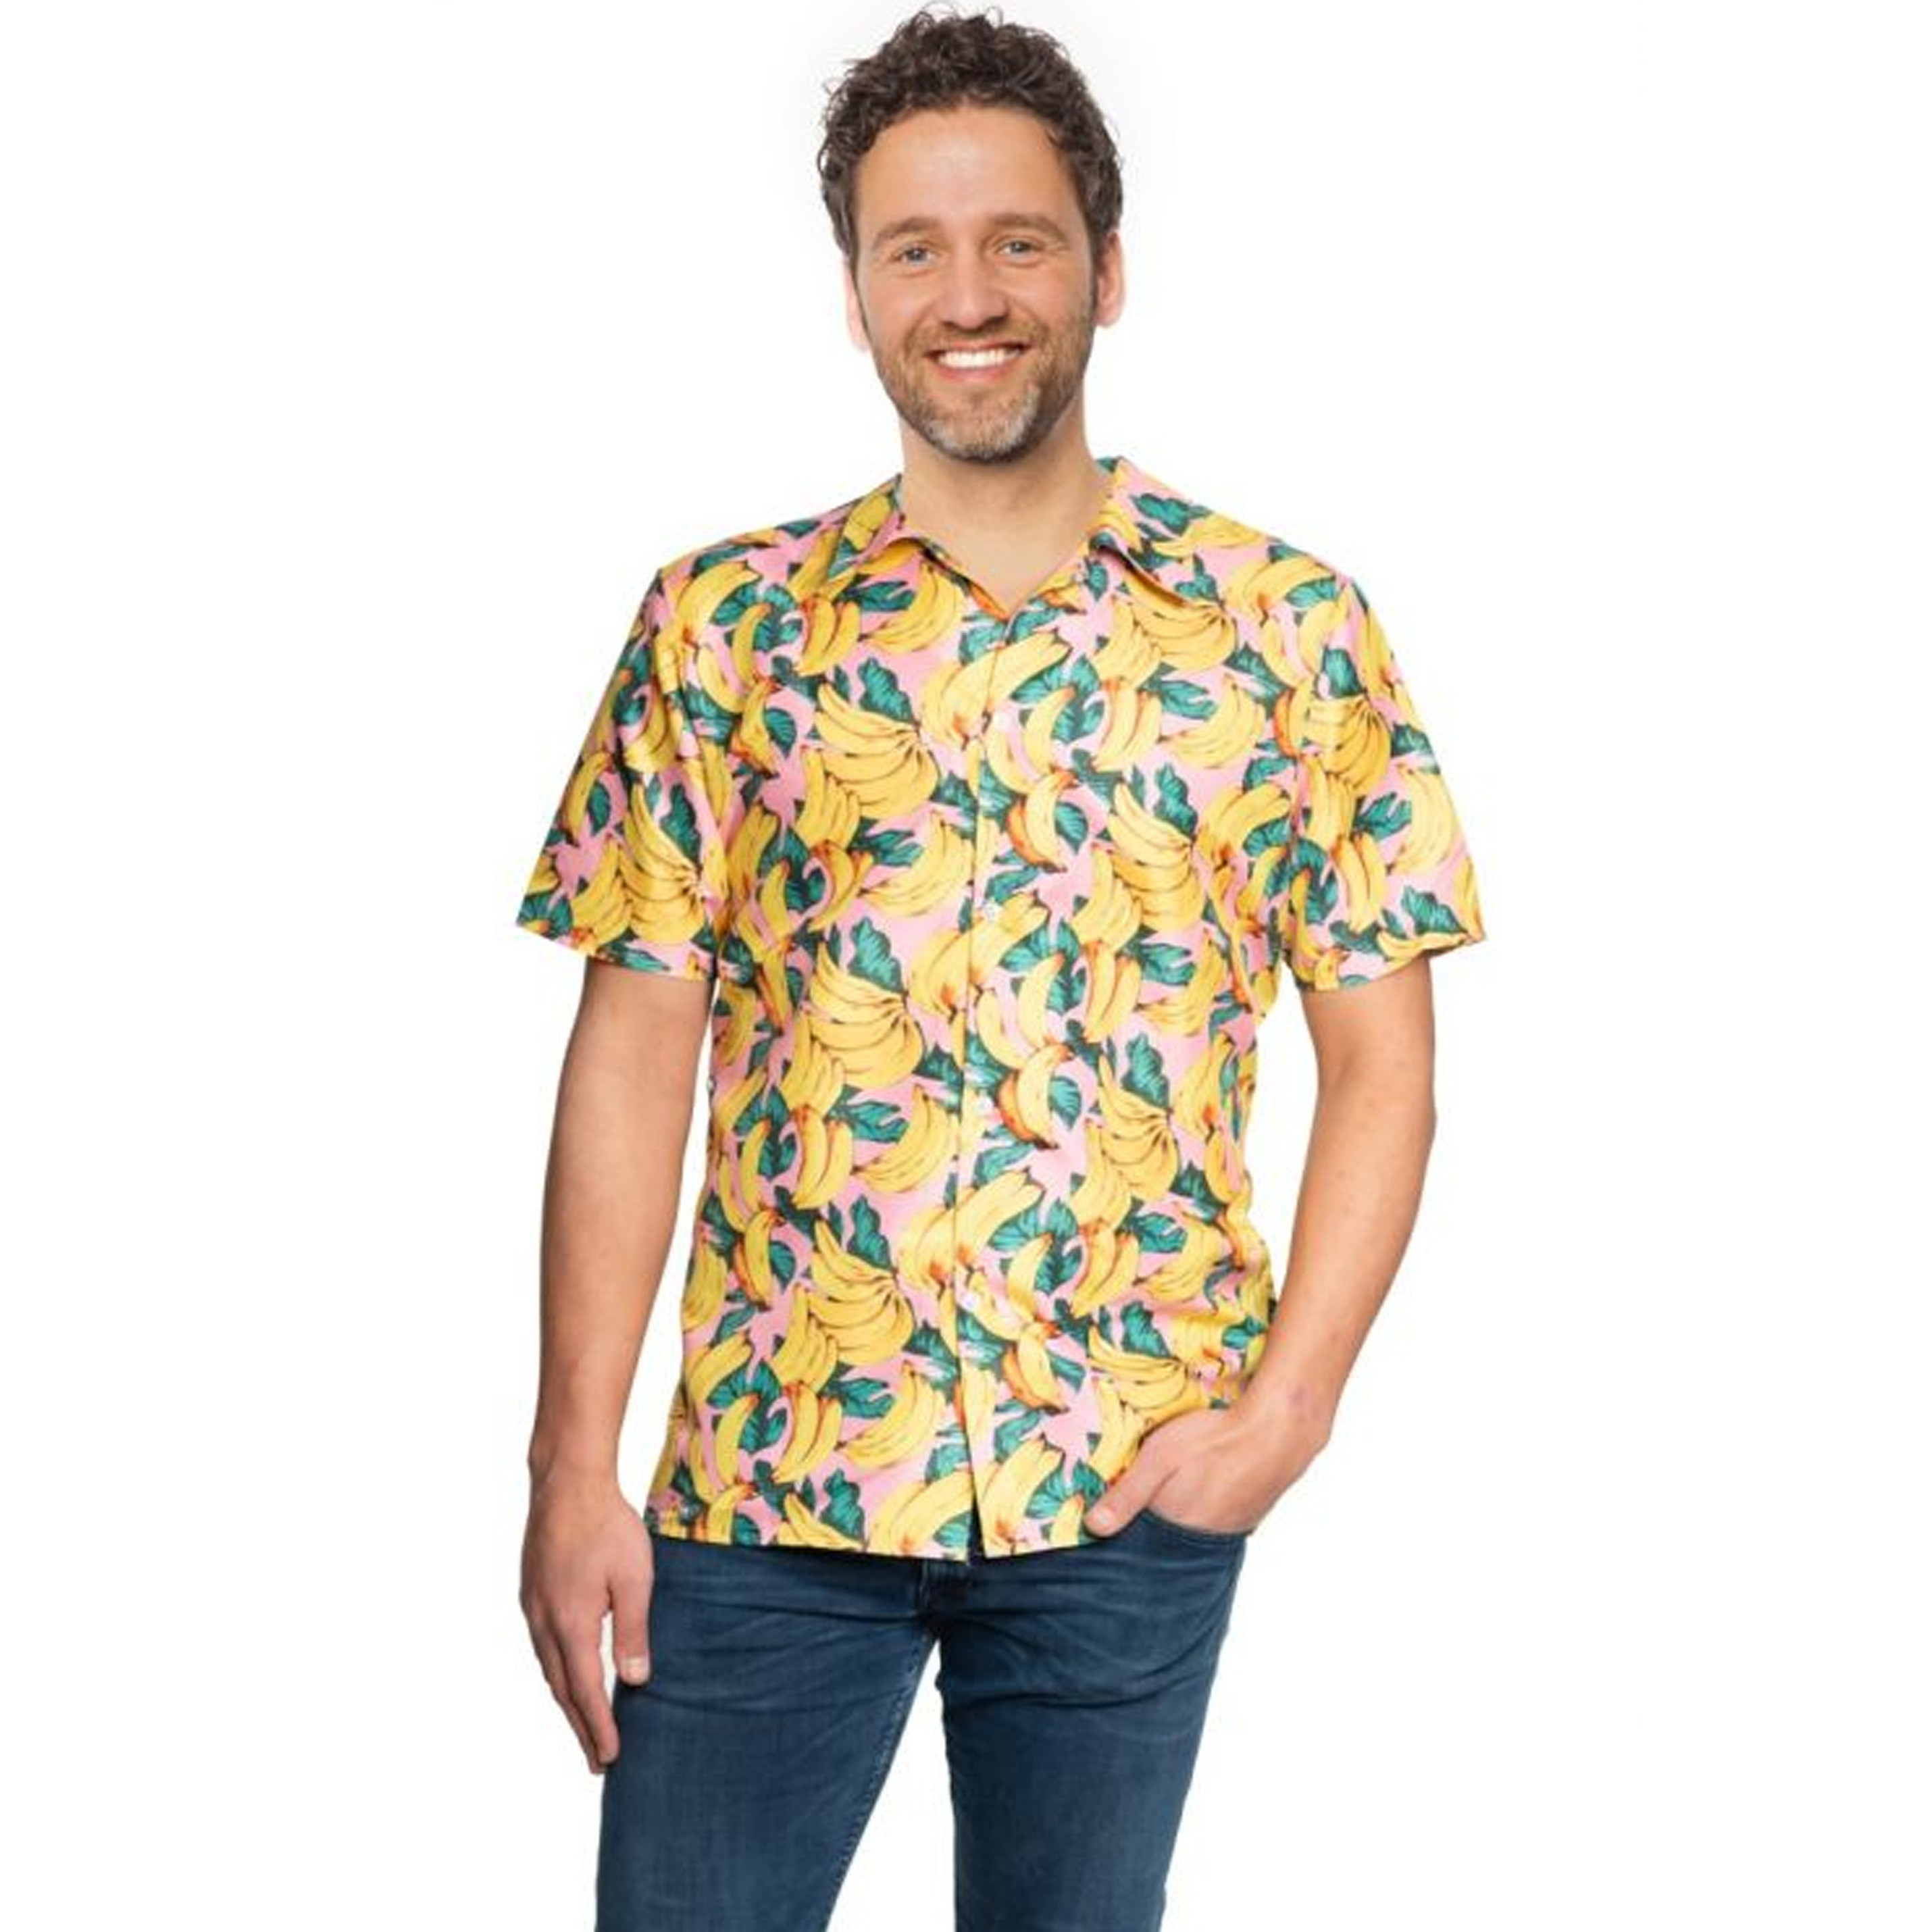 Toppers - Tropical party Hawaii blouse heren - banaan - geel - carnaval/themafeest - plus size